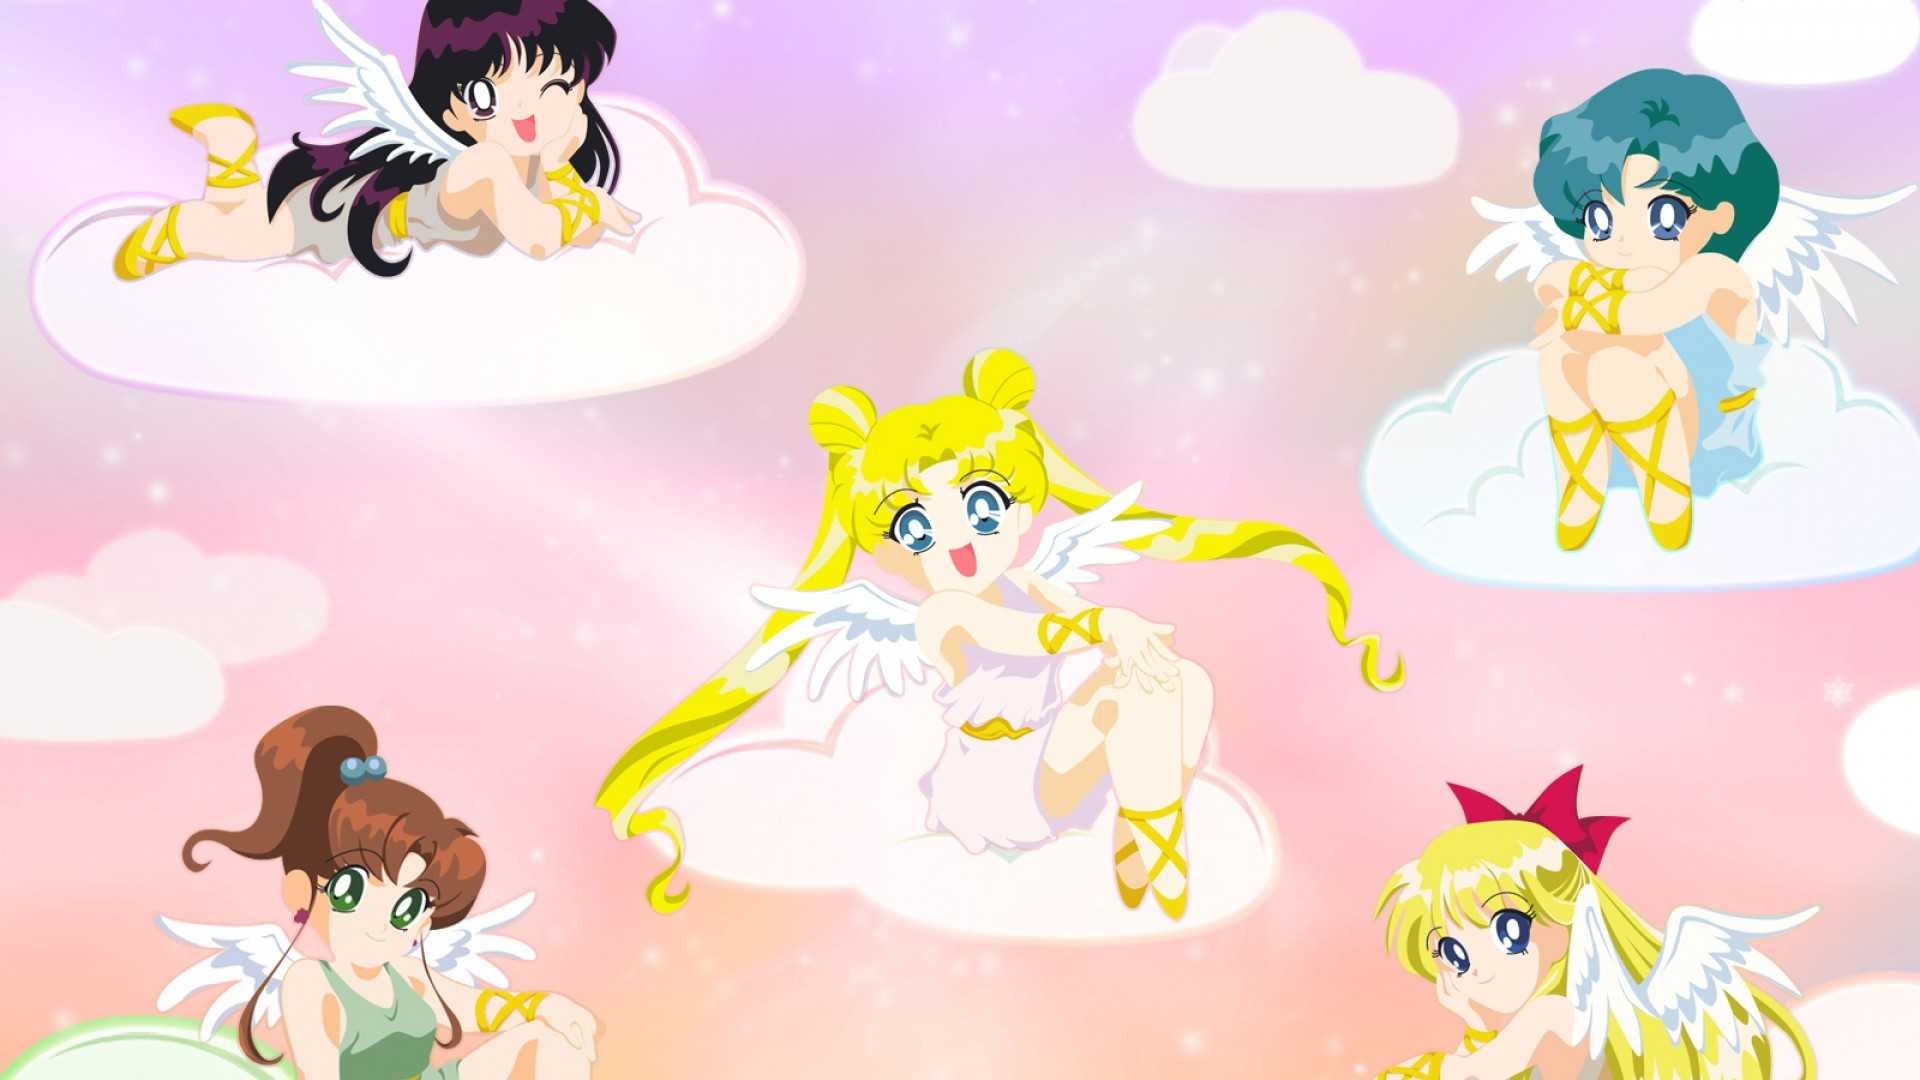 Get the latest sailor moon, girls, clouds news, pictures and videos and learn all about sailor moon, girls, clouds from wallpapers4u.org, your wallpaper